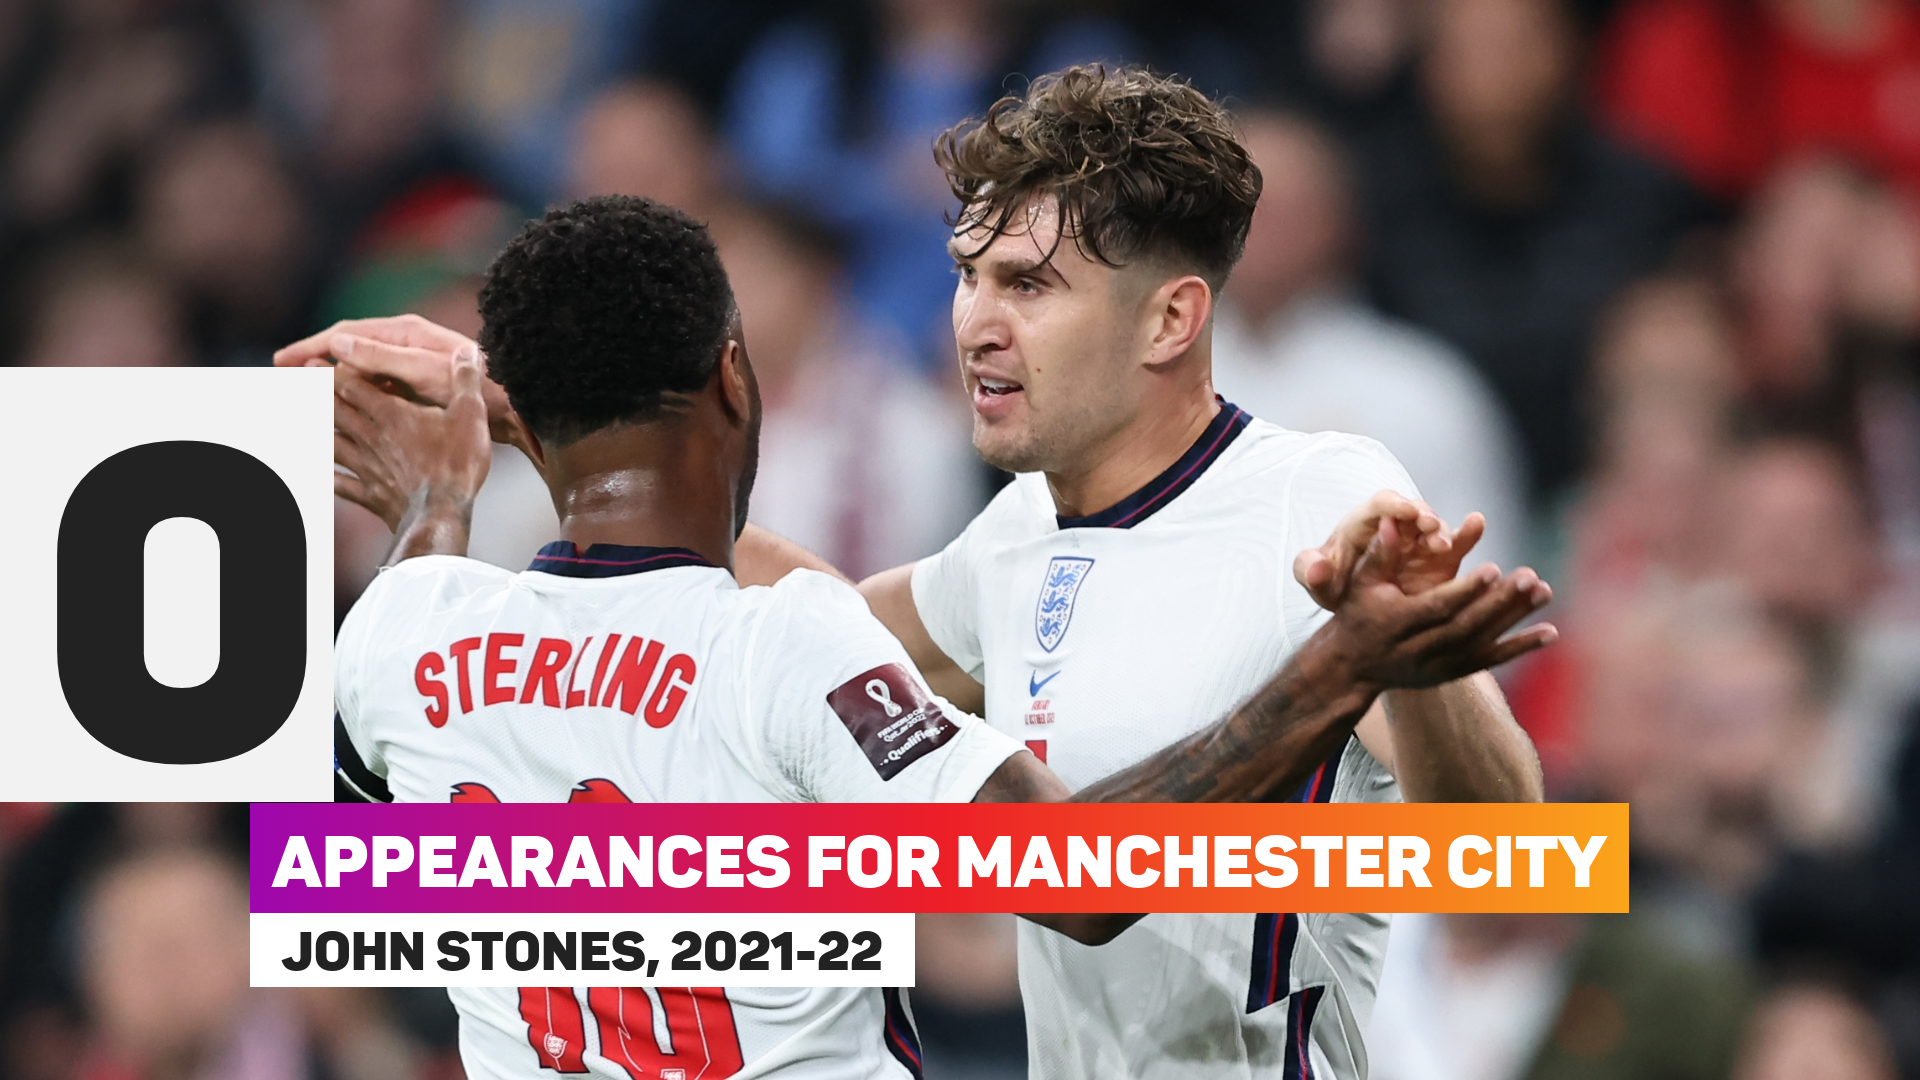 John Stones is yet to play for Manchester City this season